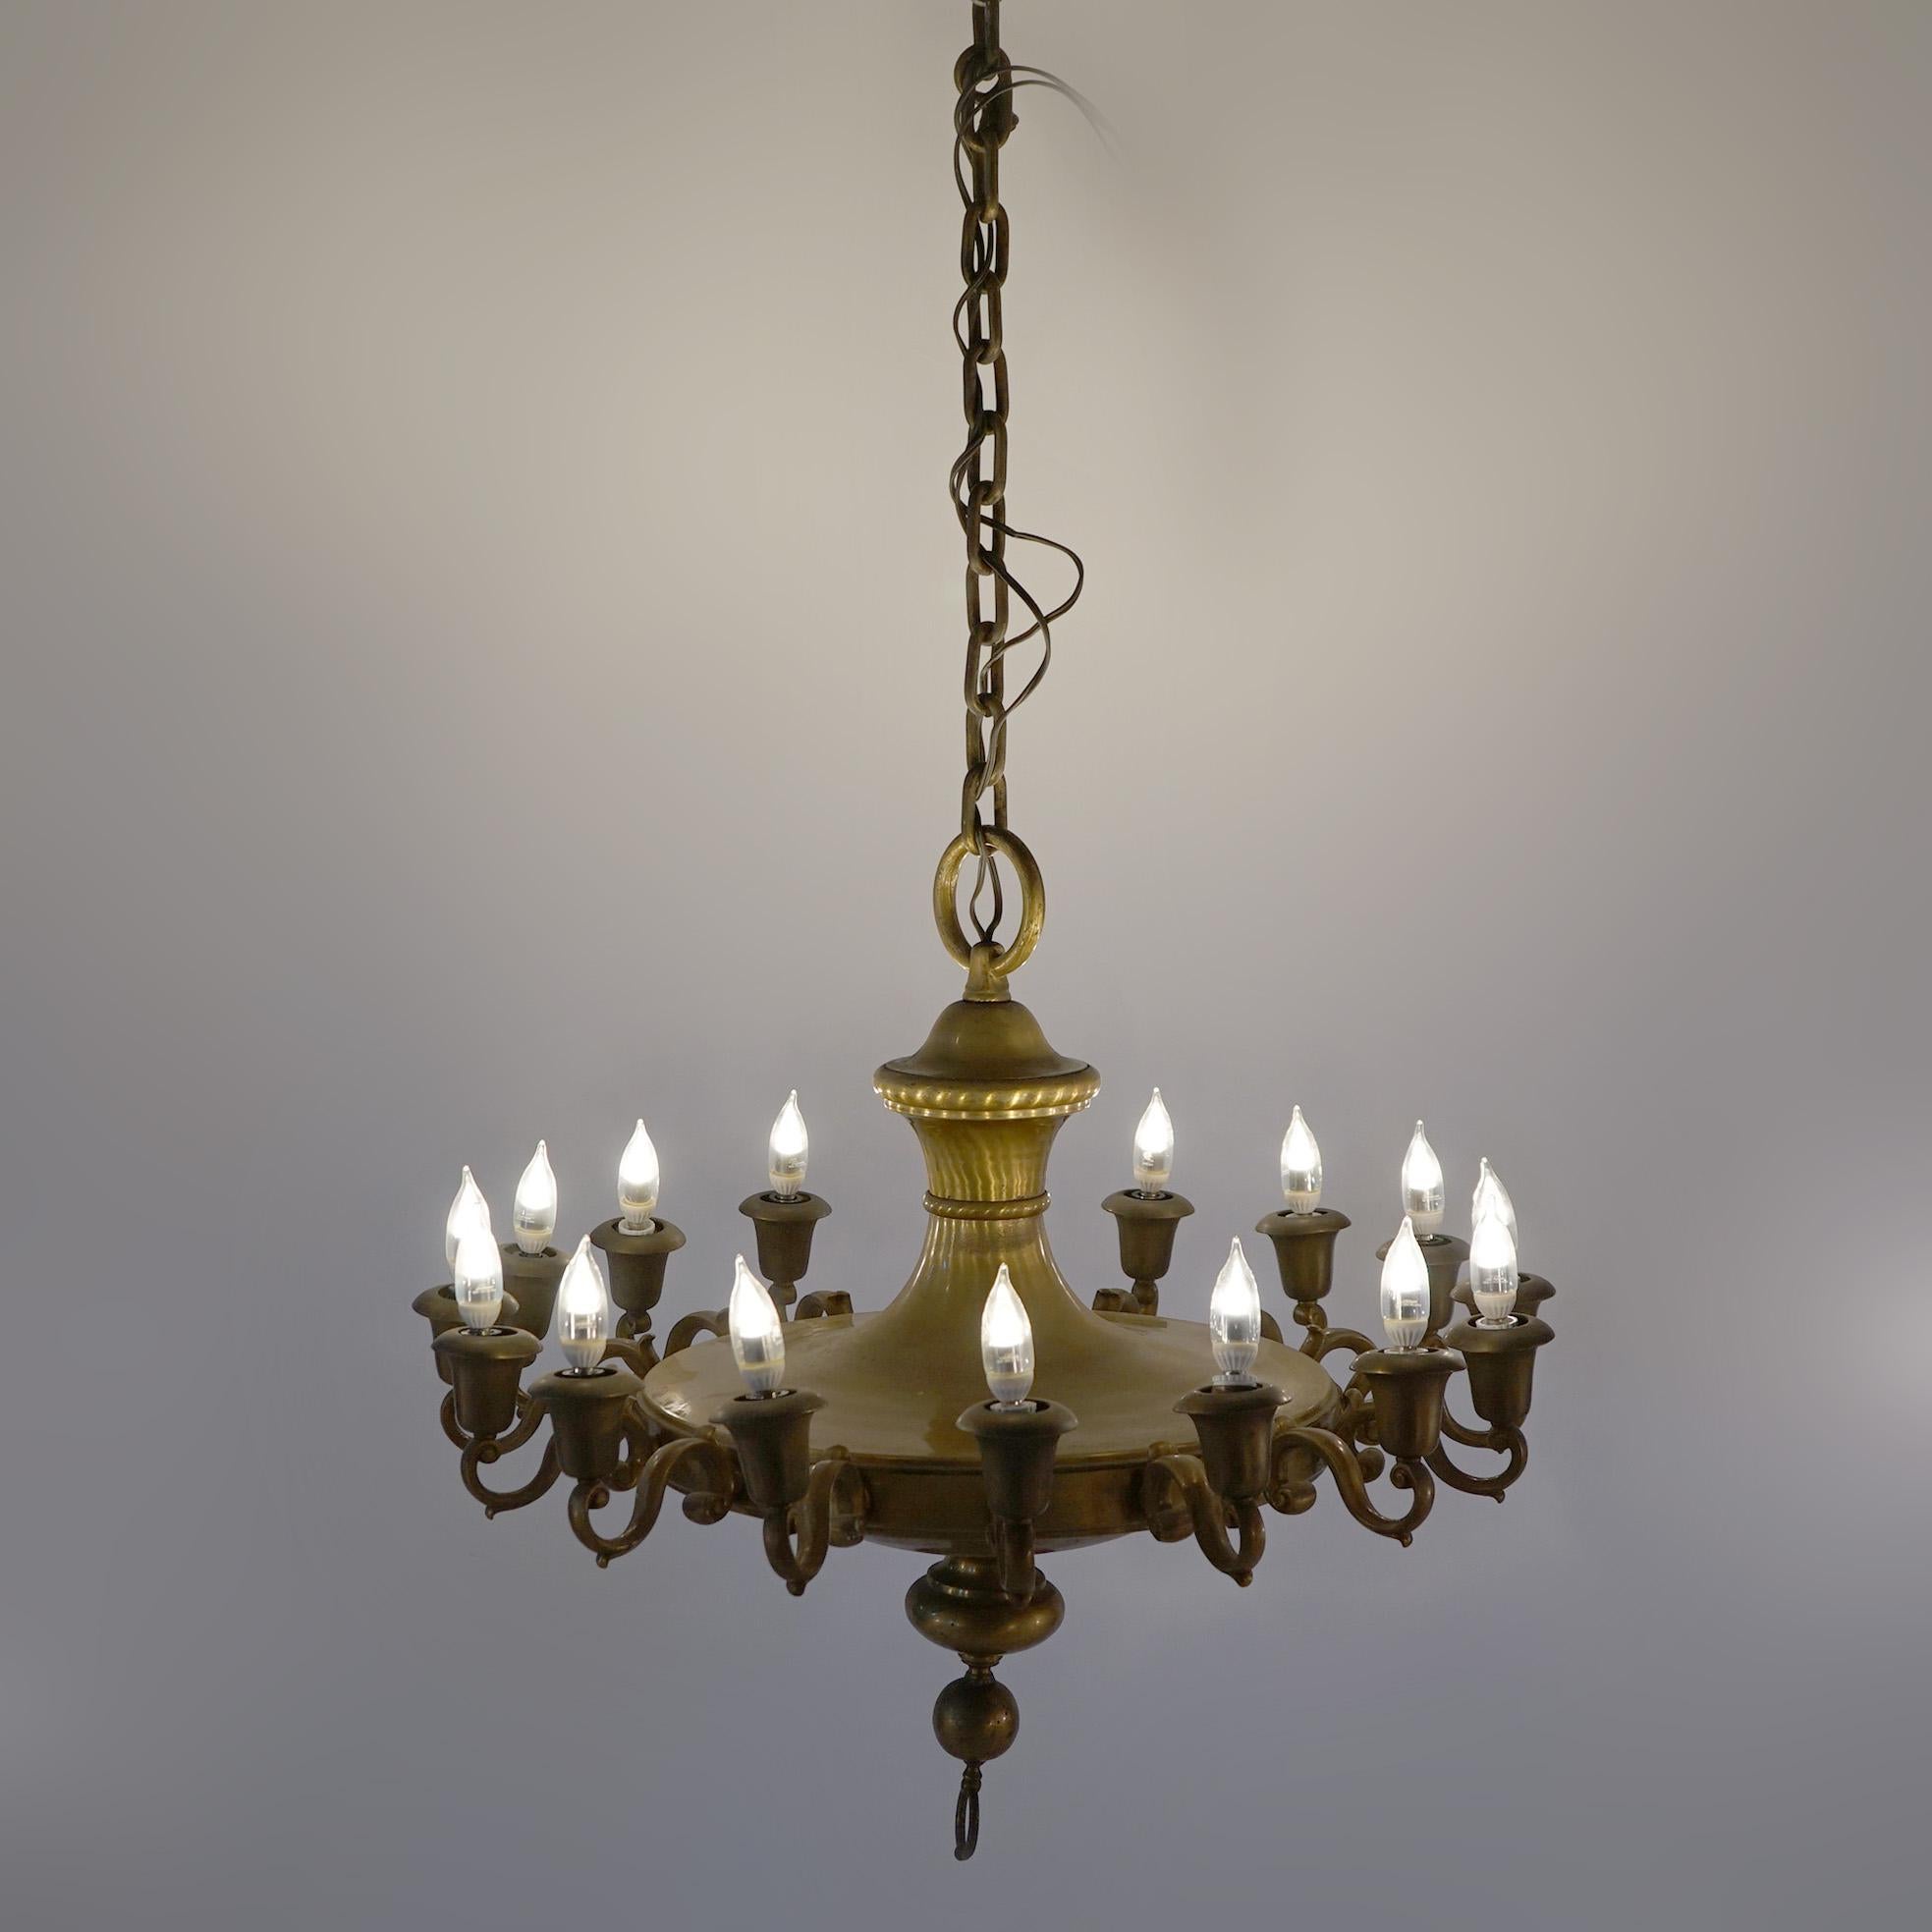 Antique Oversized French Empire Style Brass  16-Light Pan Chandelier, 20th C For Sale 12